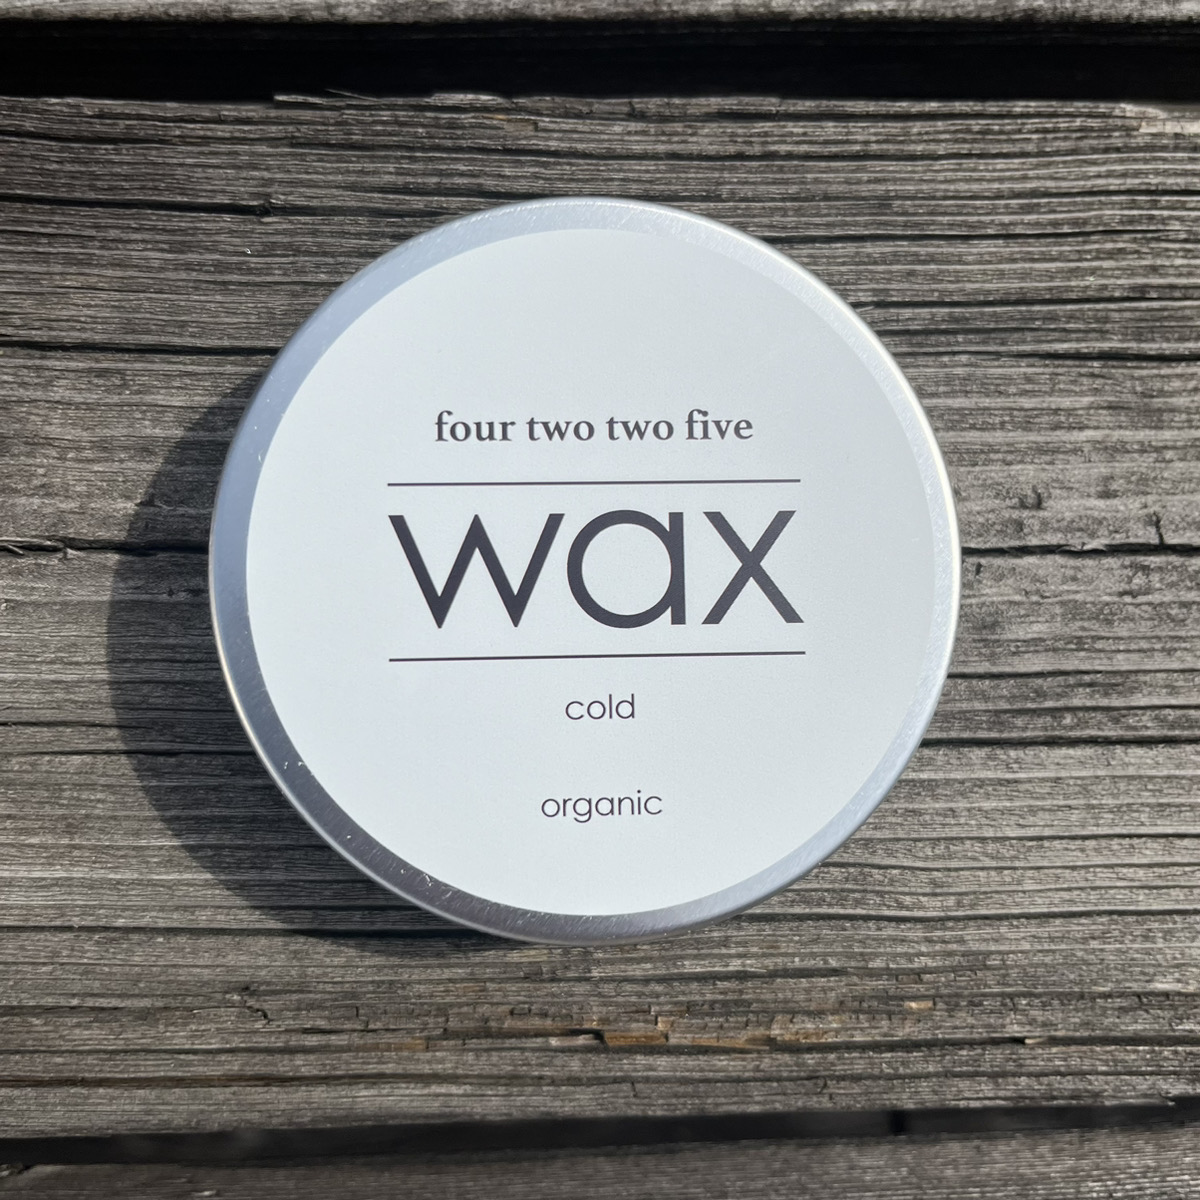 4225（four two two five）WAX 缶 ステッカー入り